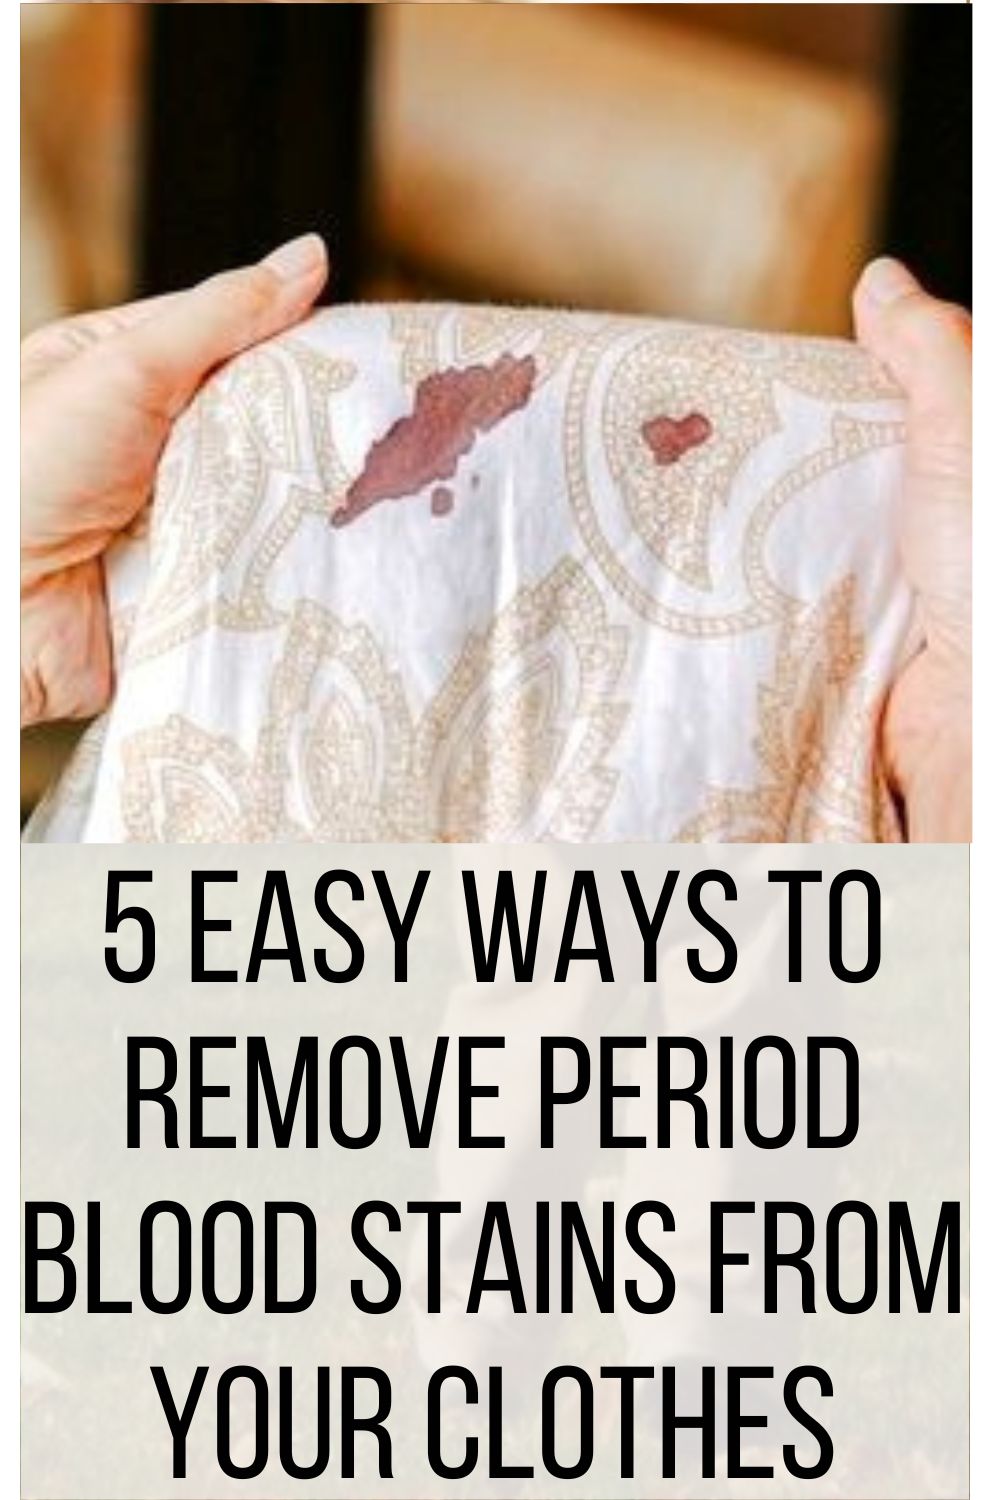 5 Easy Ways To Remove Period Blood Stains From Your Clothes